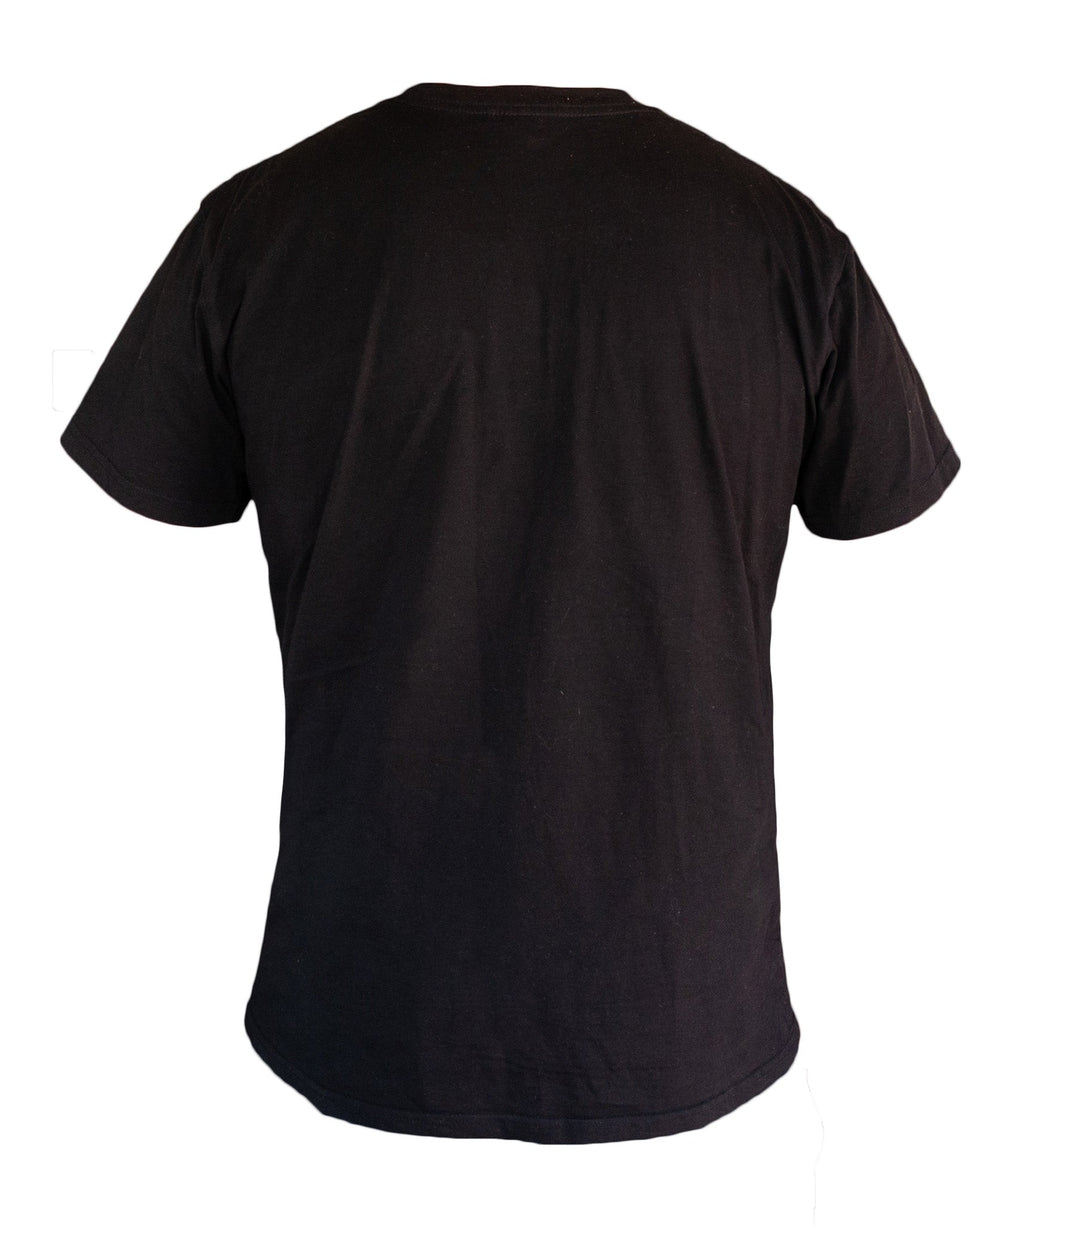 Image of the back of the mens Send It Outlier T-shirt featuring no print on a dark black colored shirt.